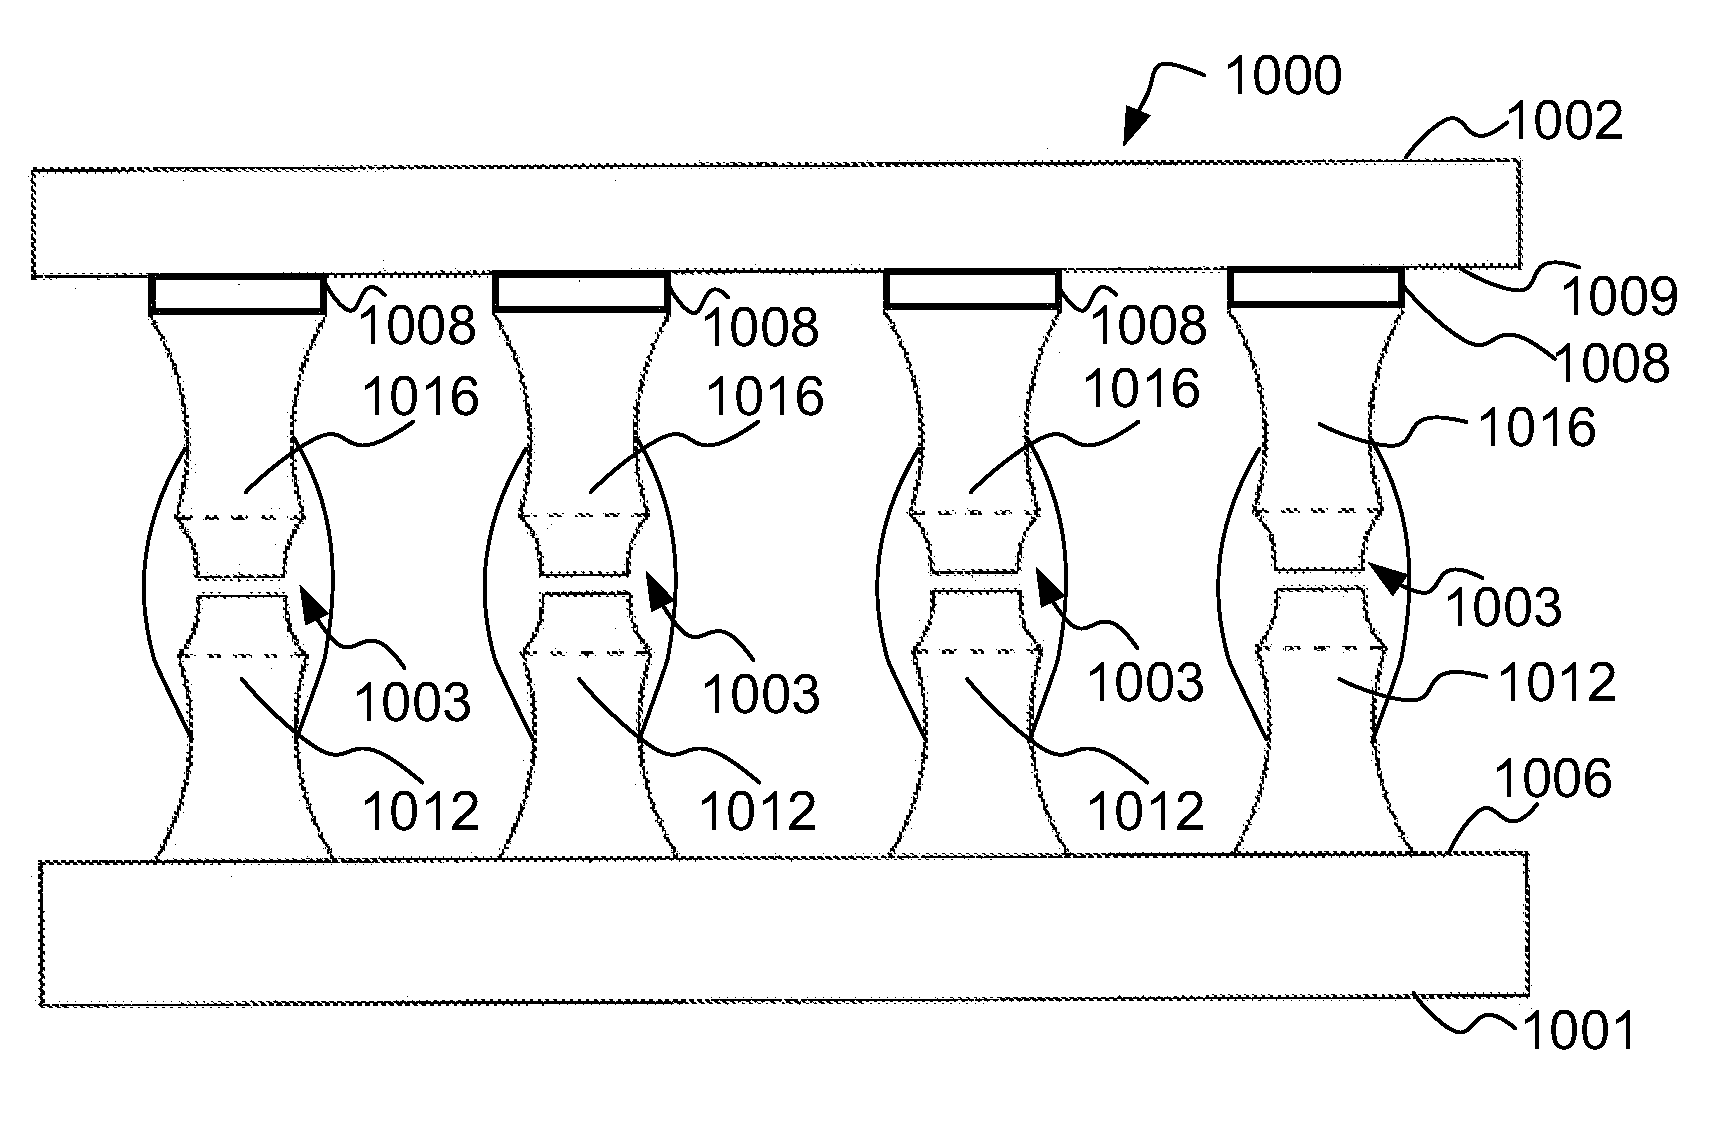 Microelectronic packages with dual or multiple-etched flip-chip connectors